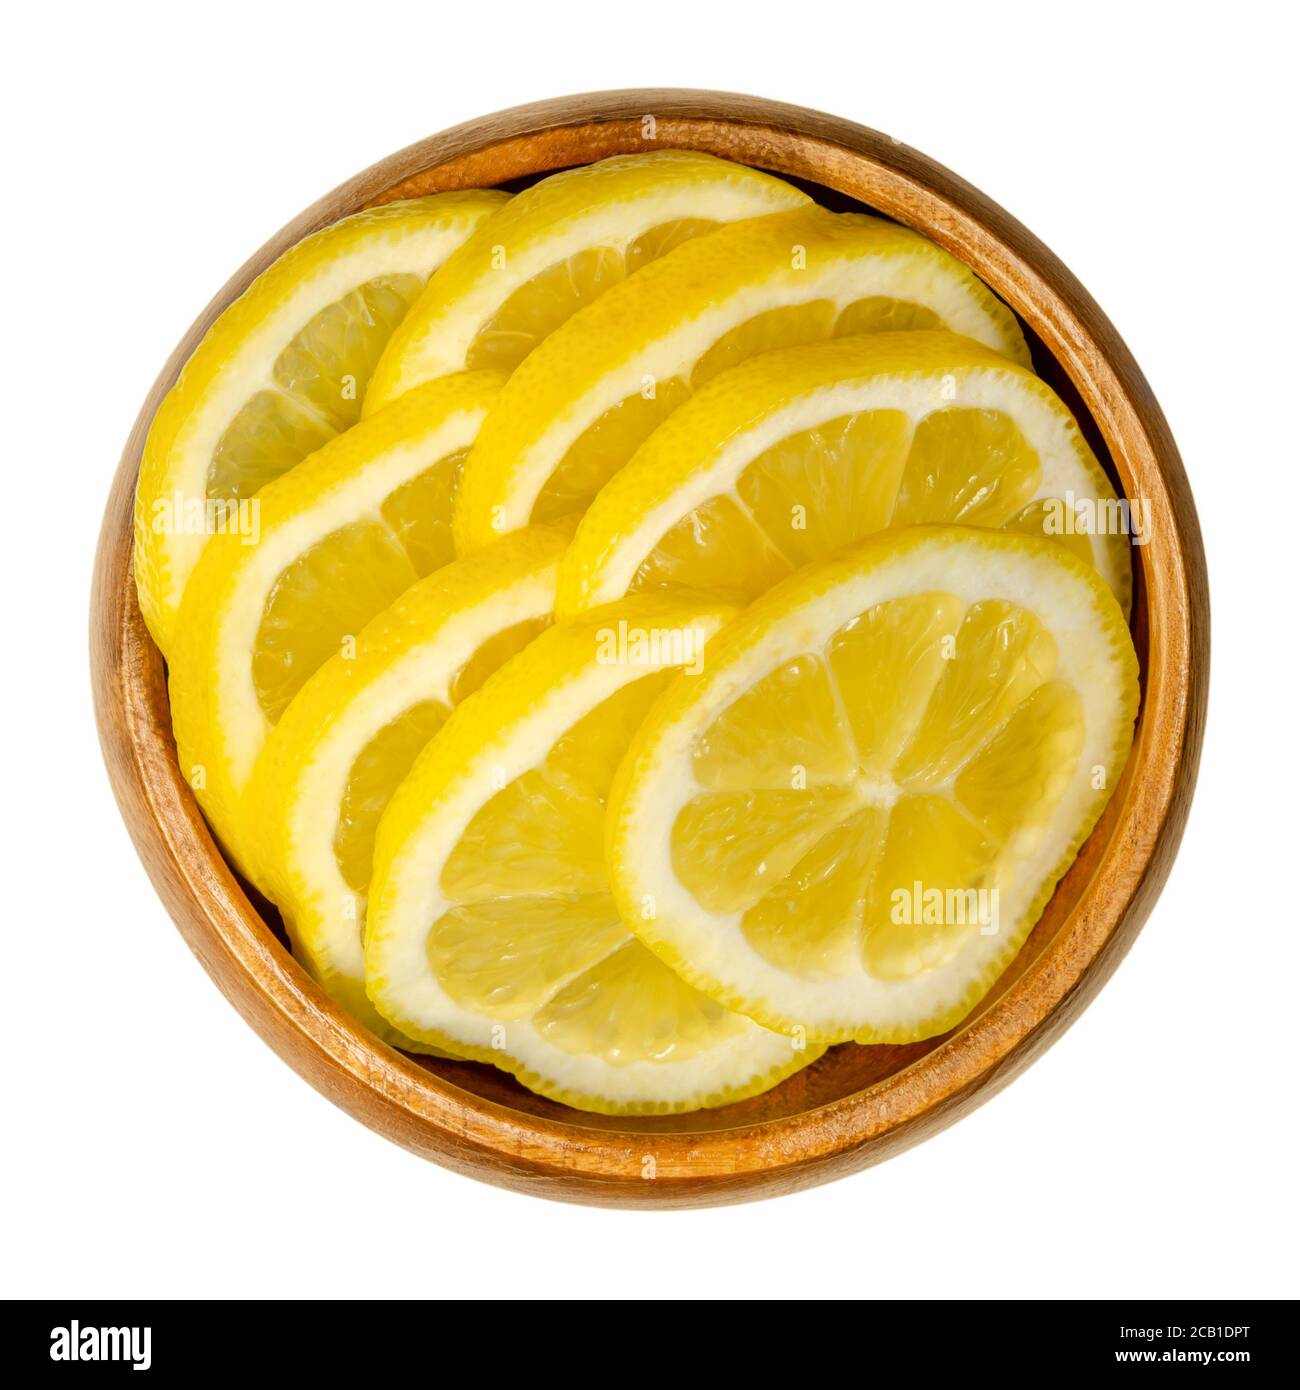 Fresh lemon slices in a wooden bowl. Sliced ripe yellow citrus fruits. Citrus limon. Lemons are used for culinary purposes and for cleaning. Stock Photo